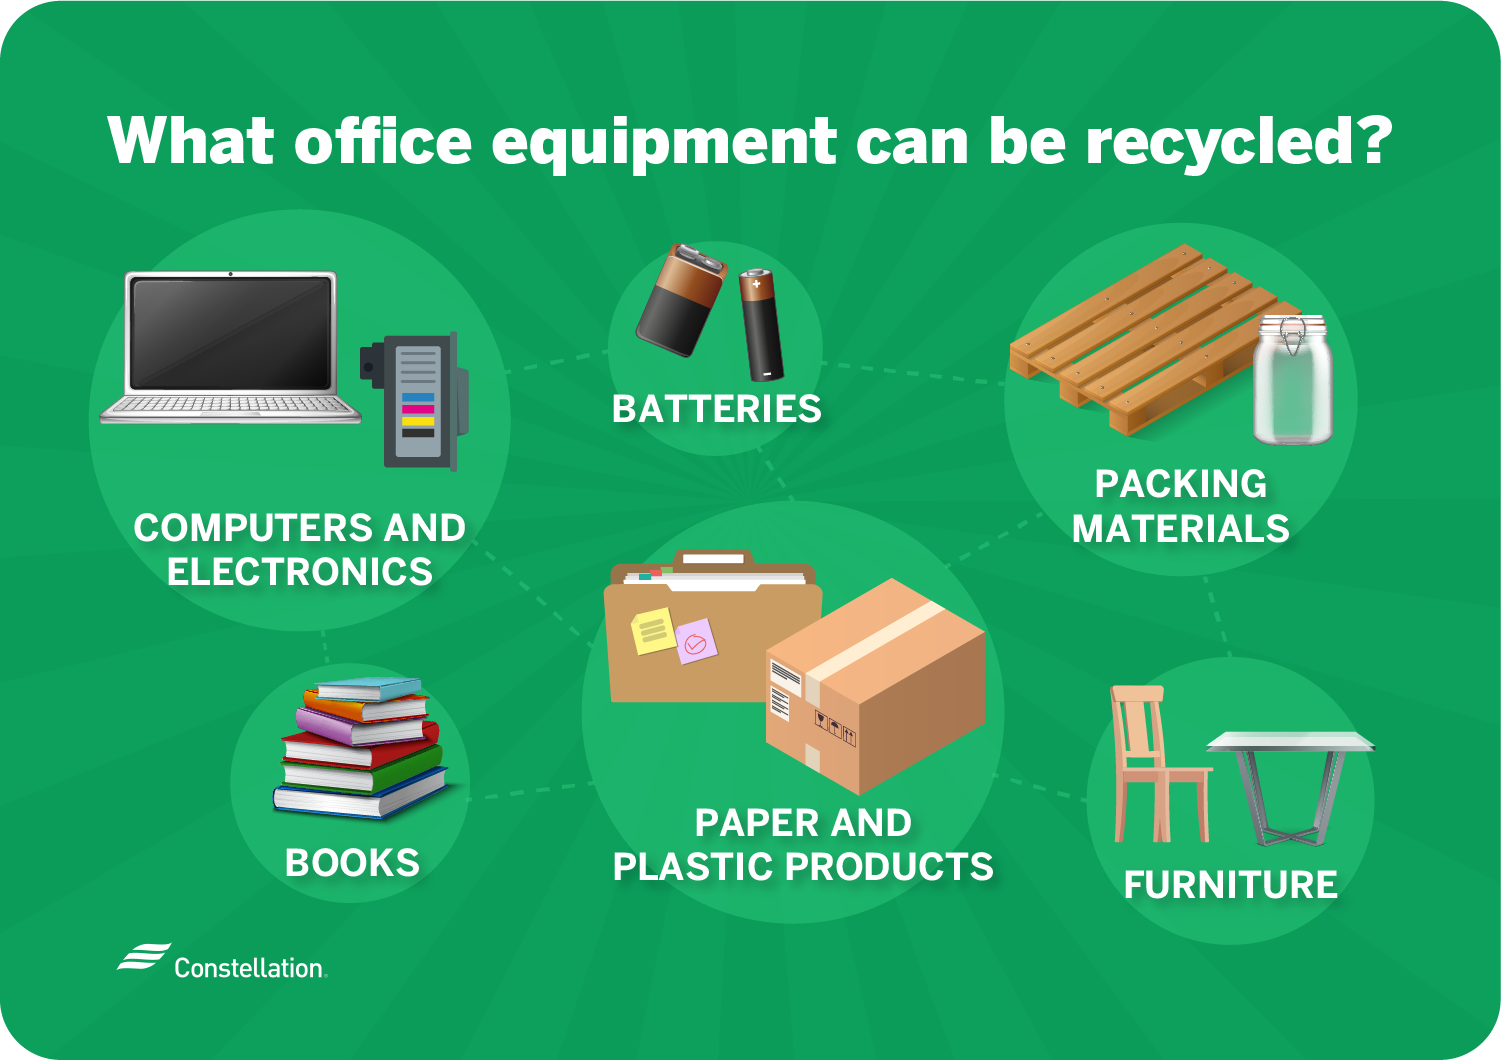 What office equipment can be recycled?